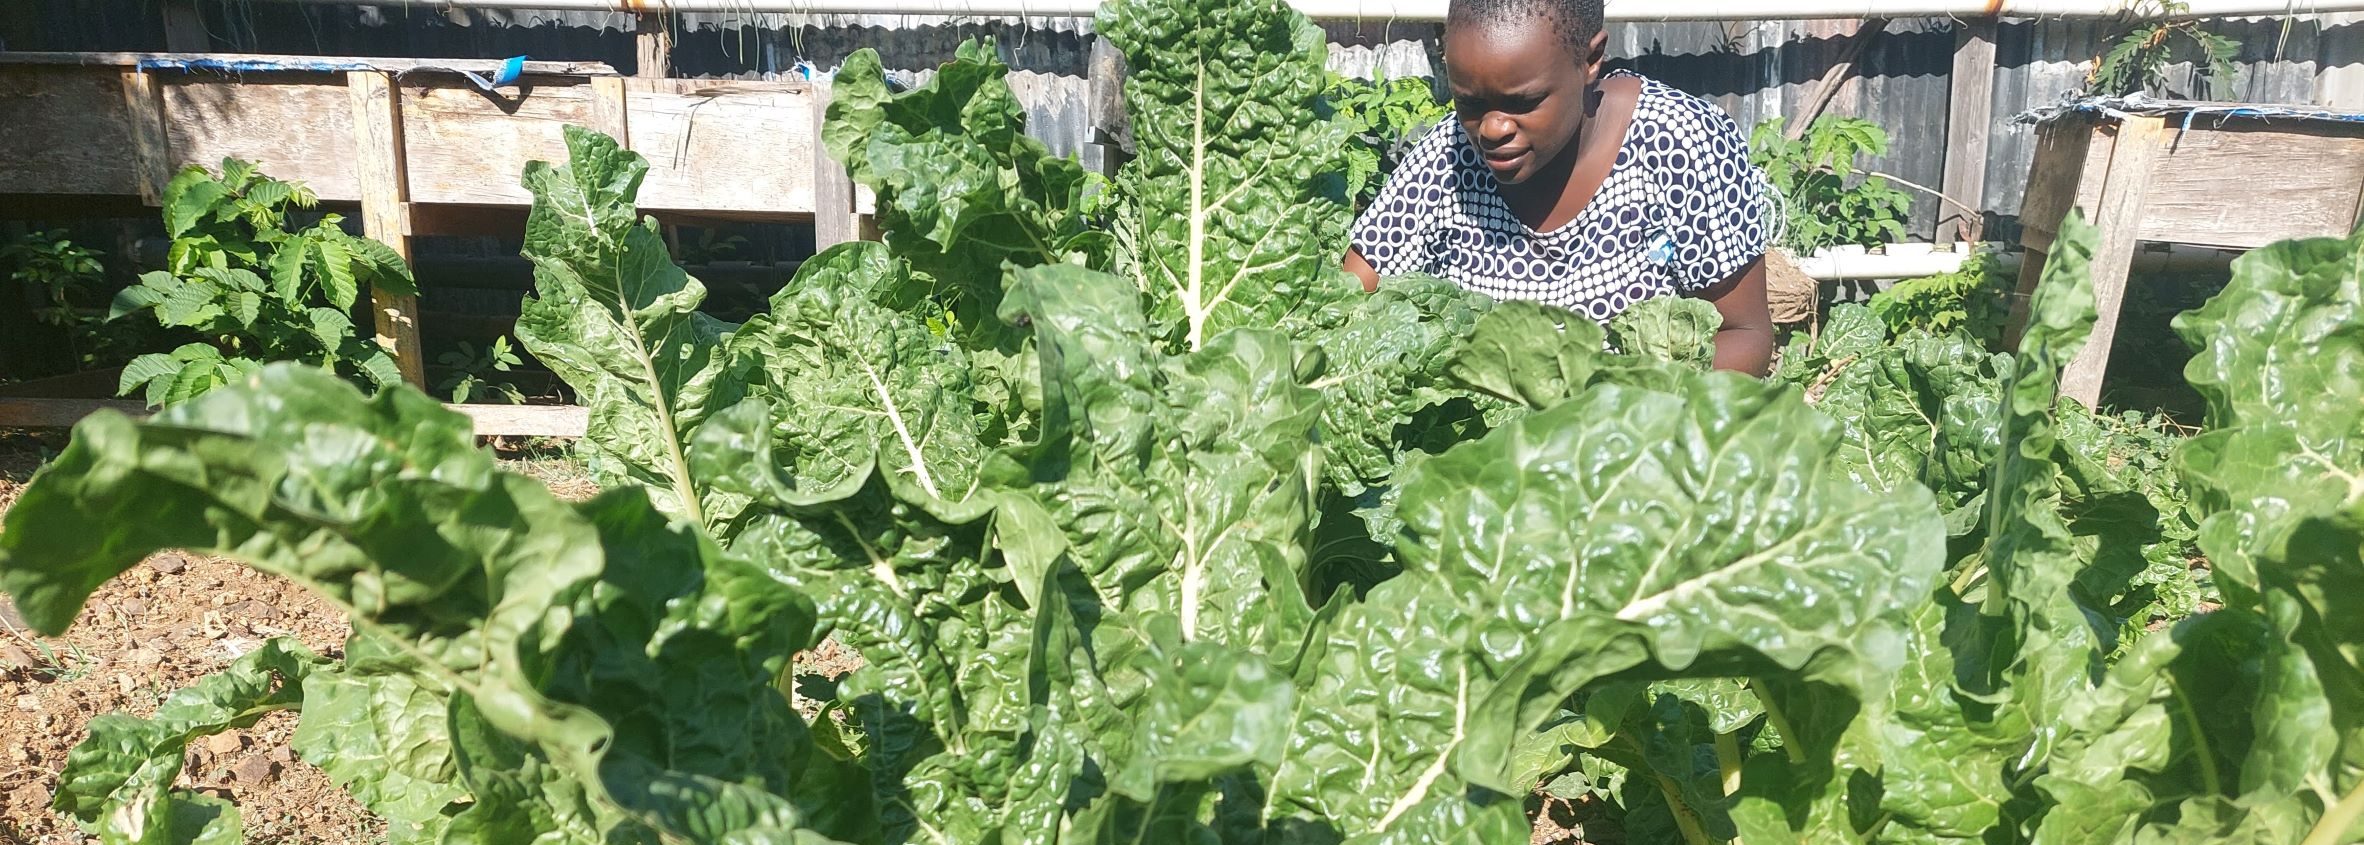 Women in sustainable agriculture